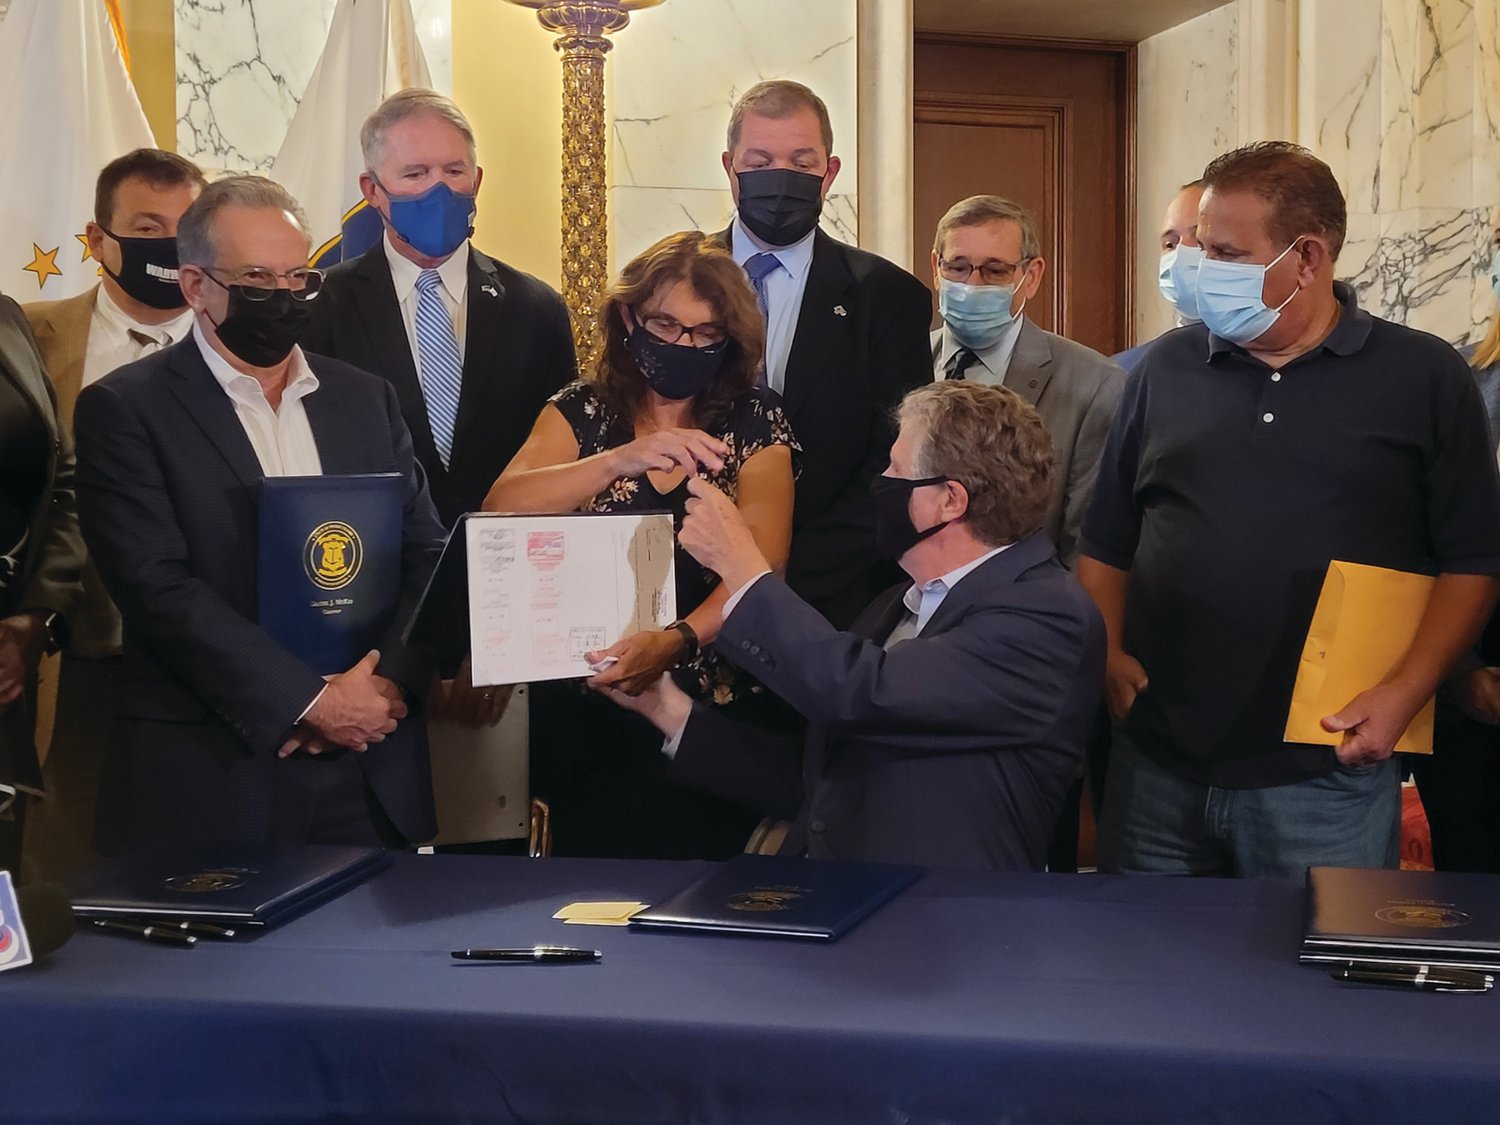 ‘RYAN’S LAW’: Rhode Island Gov. Dan McKee handed the pen he used to sign the legislation that may ultimately be known as “Ryan’s Law” to co-sponsor state Rep. Deborah Fellela, who then gave the pen to Cranston resident and Johnston native Lou Massemini, who’s son’s death helped inspire the bill.